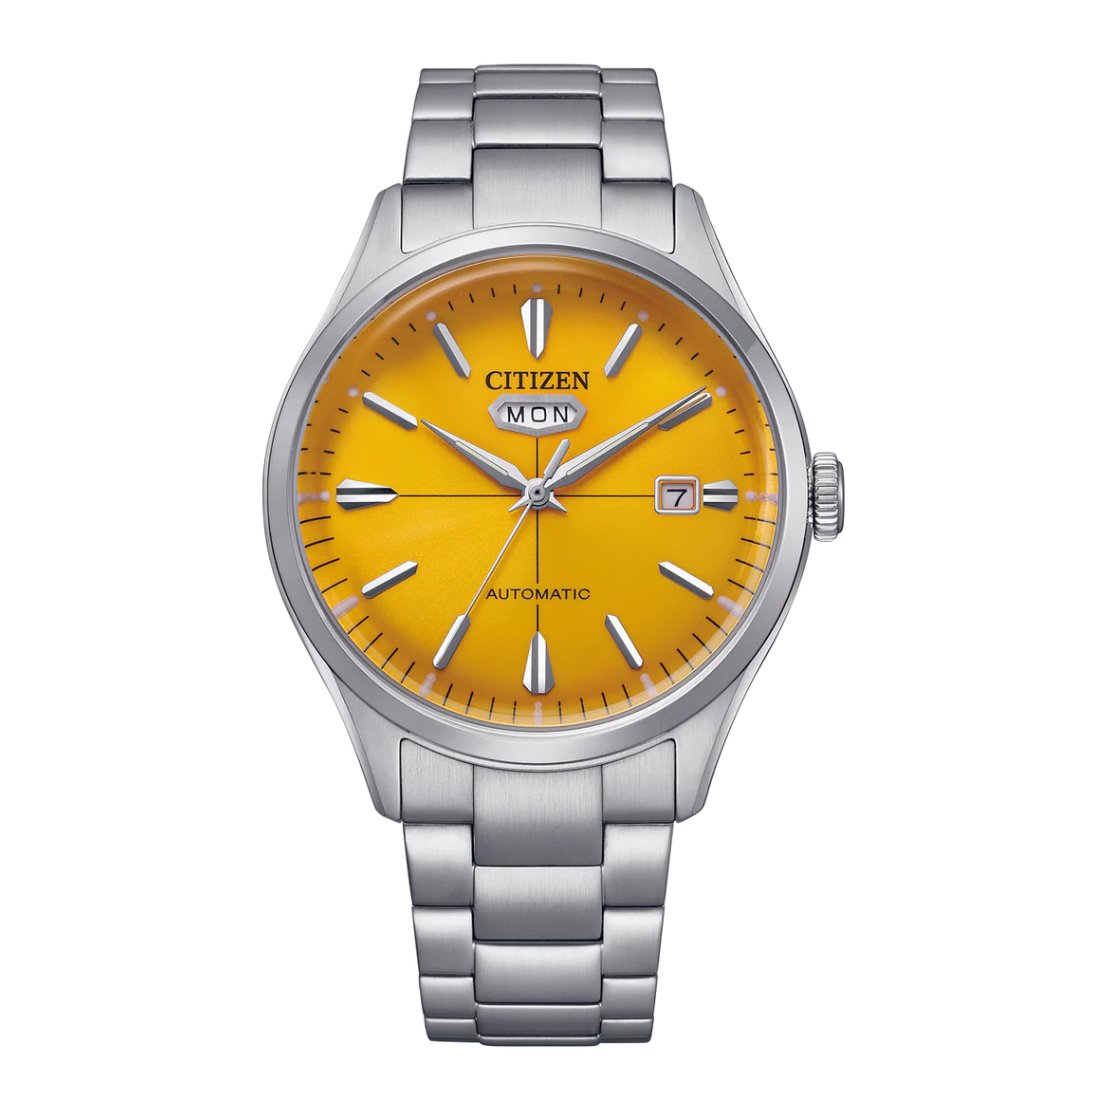 Citizen Re-issue Crystal Seven C7 Automatic Dress Watch NH8391-51Z -Citizen